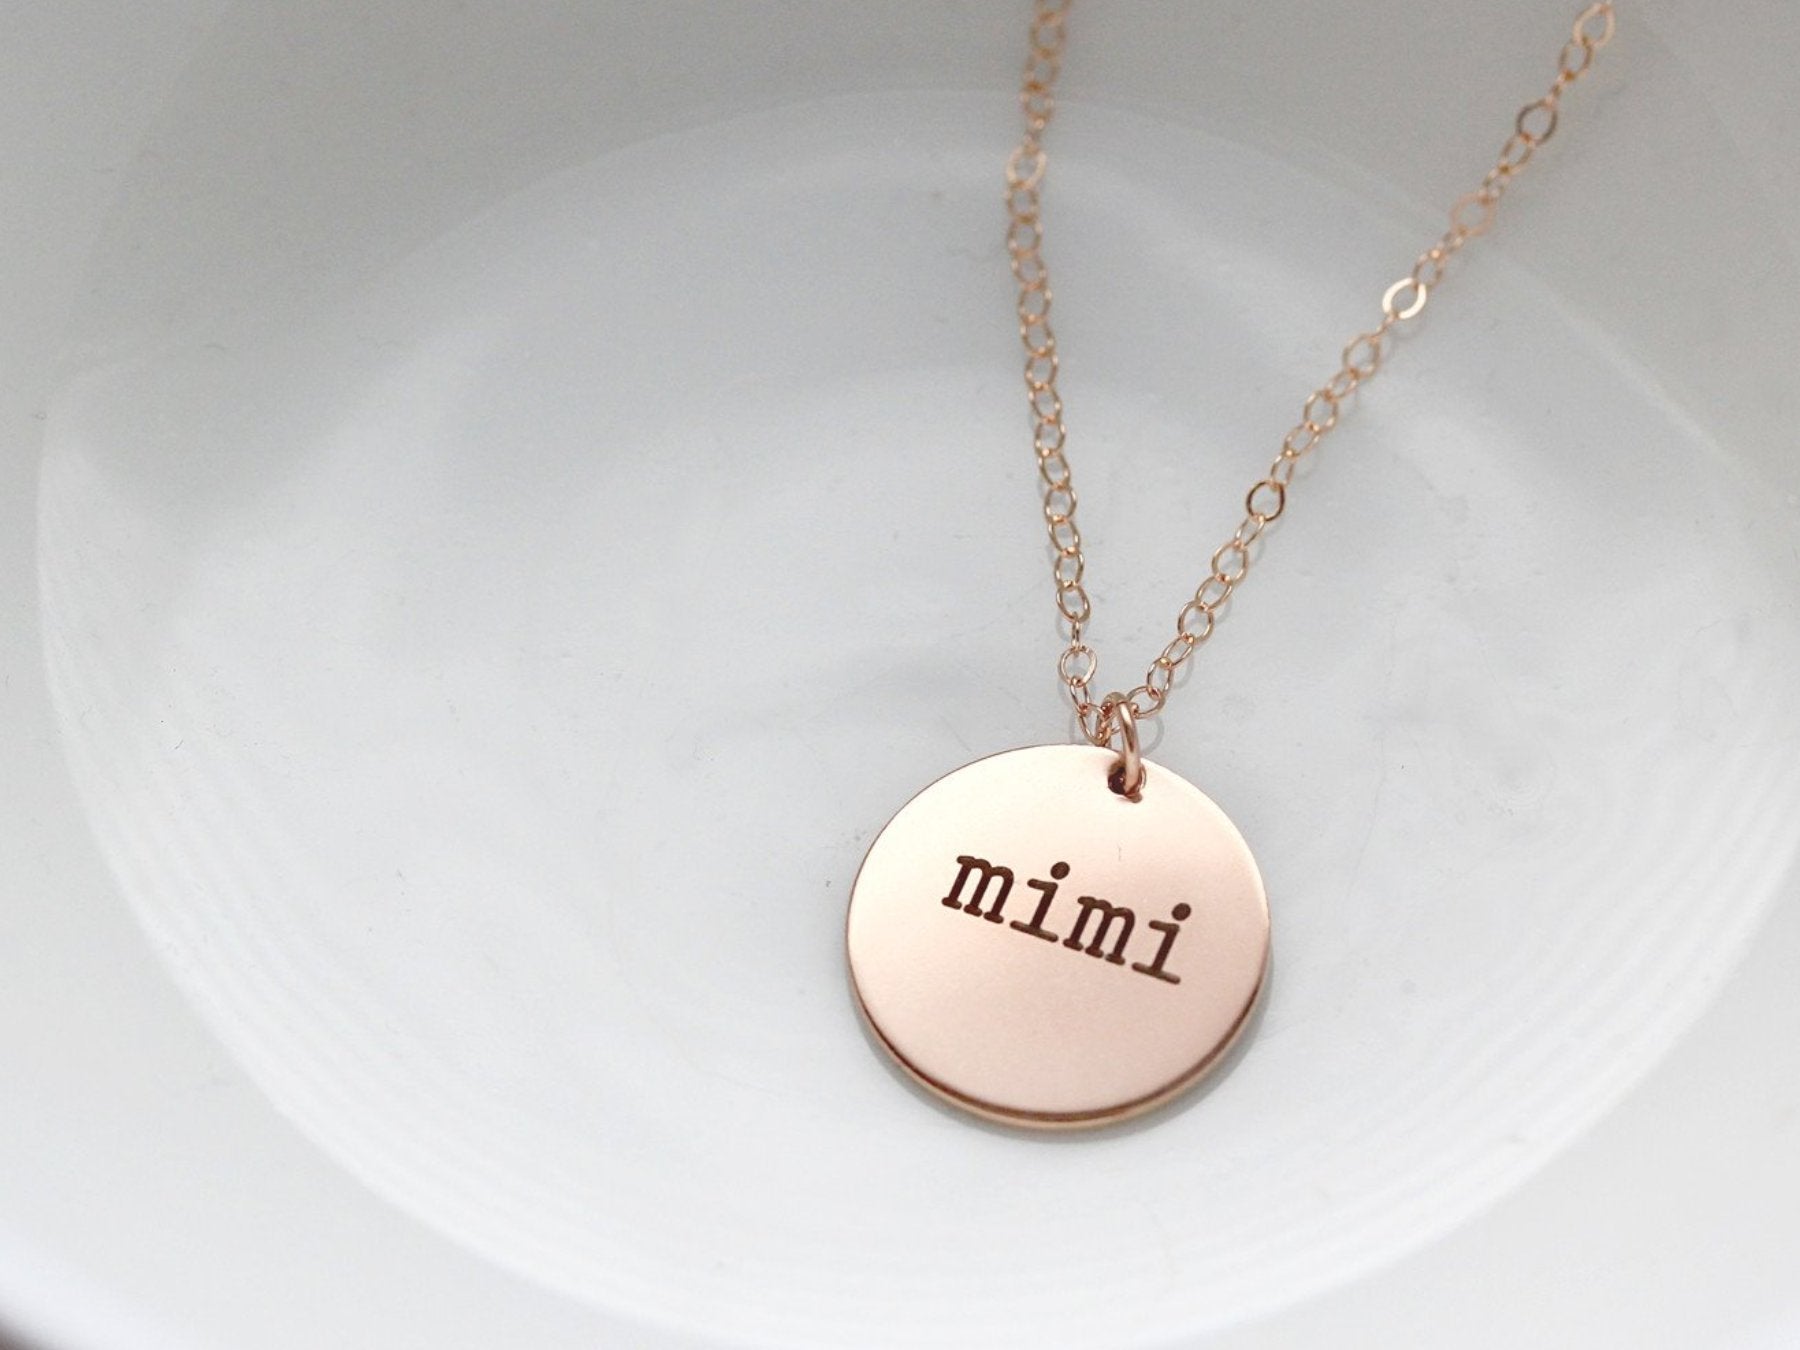 Buy Number Necklace, Lucky Number Necklace, Gold Number Jewelry, Number  Charm, Personalized Jewelry, Christmas Gift Online in India - Etsy